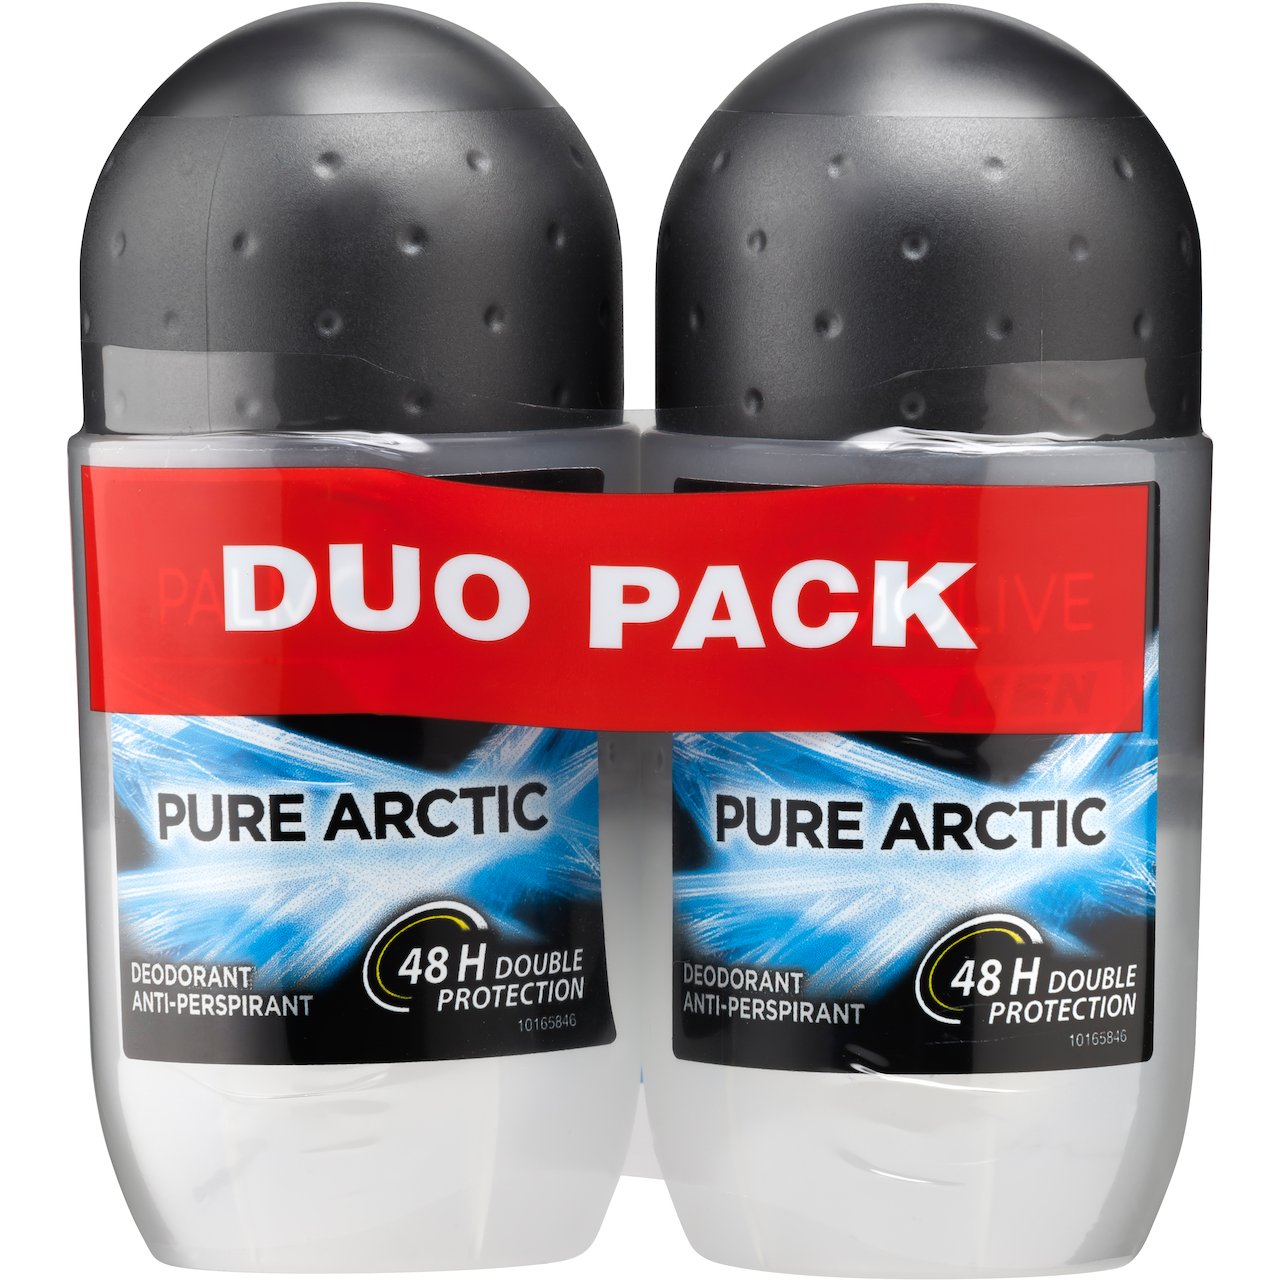 PALMOLIVE ROLL-ON DUO PACK PURE ARCTIC